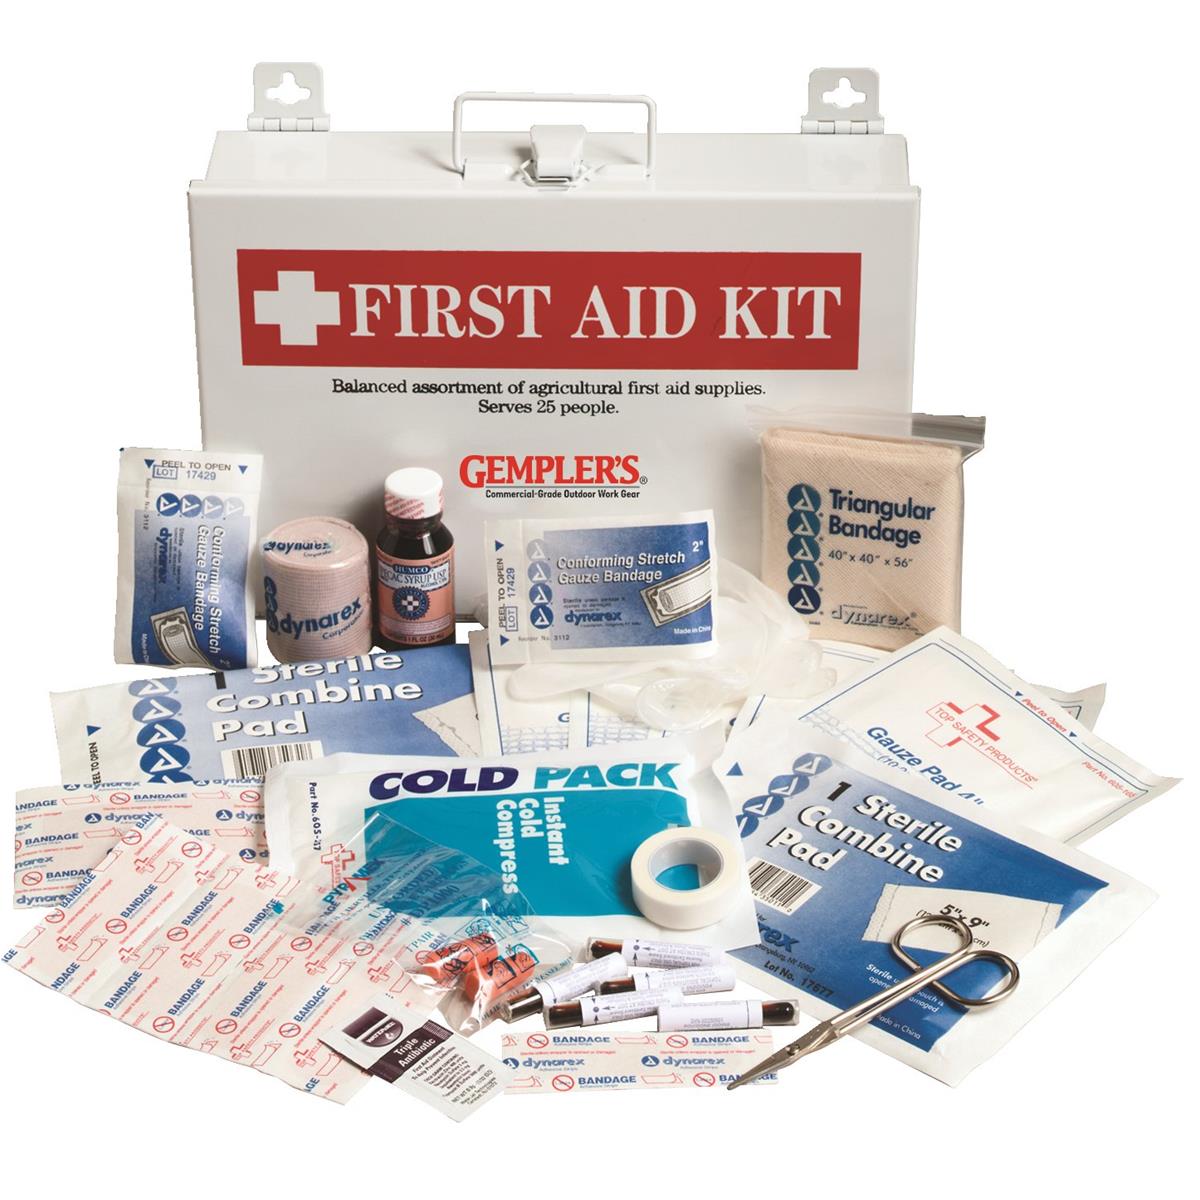 materials found in first aid box